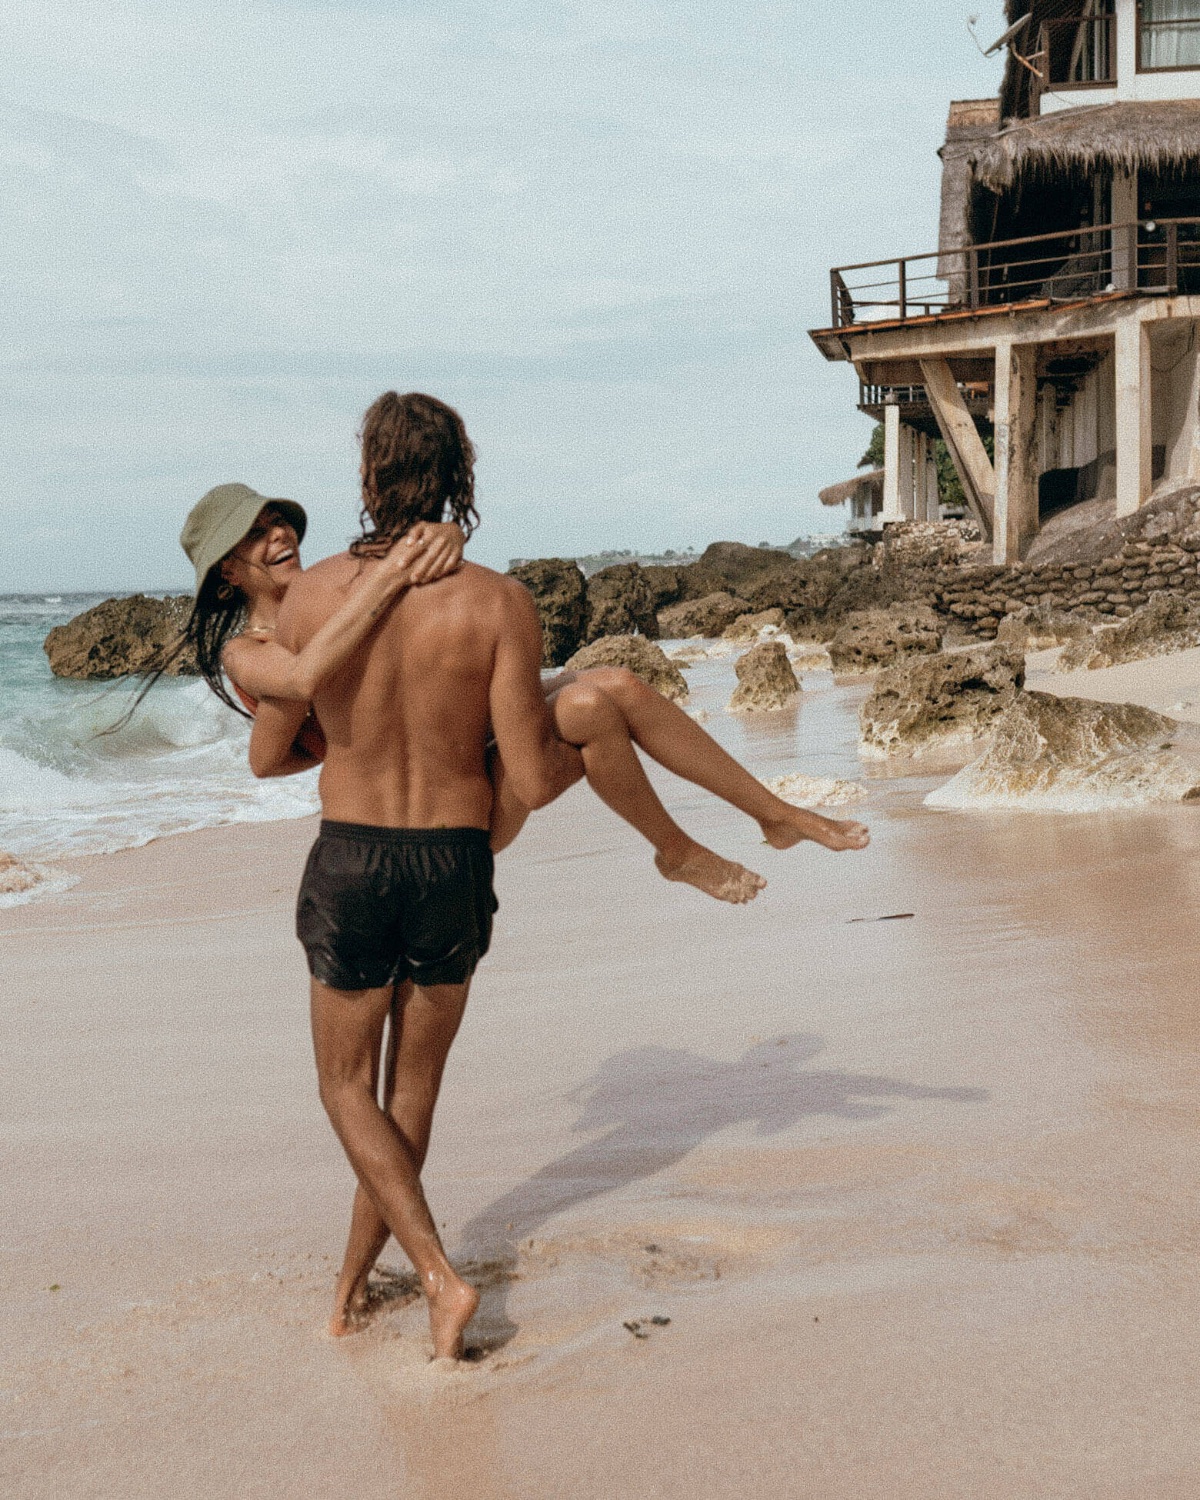 couple in the beach, man carrying woman in his arms